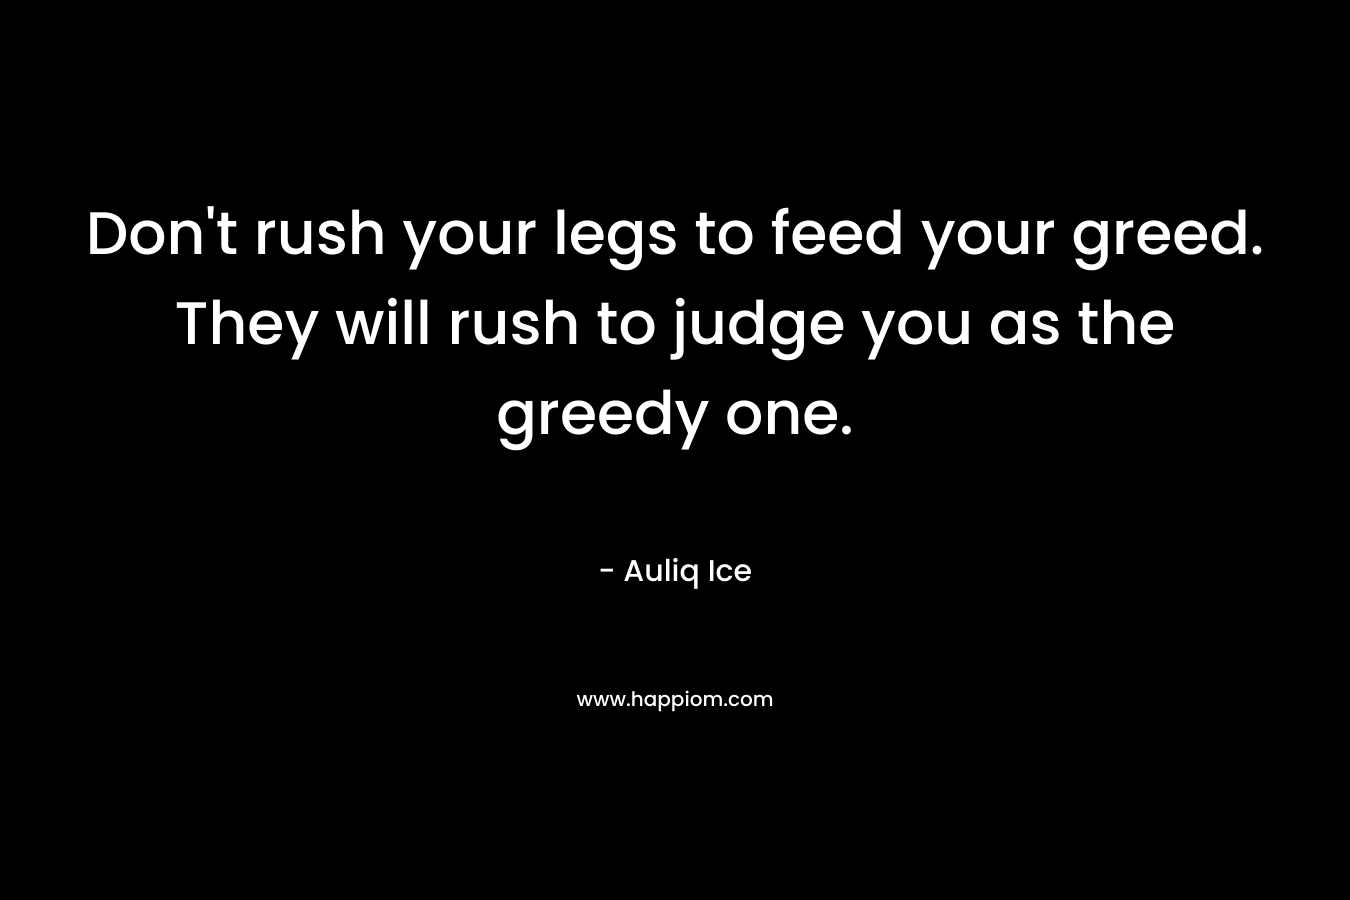 Don't rush your legs to feed your greed. They will rush to judge you as the greedy one.